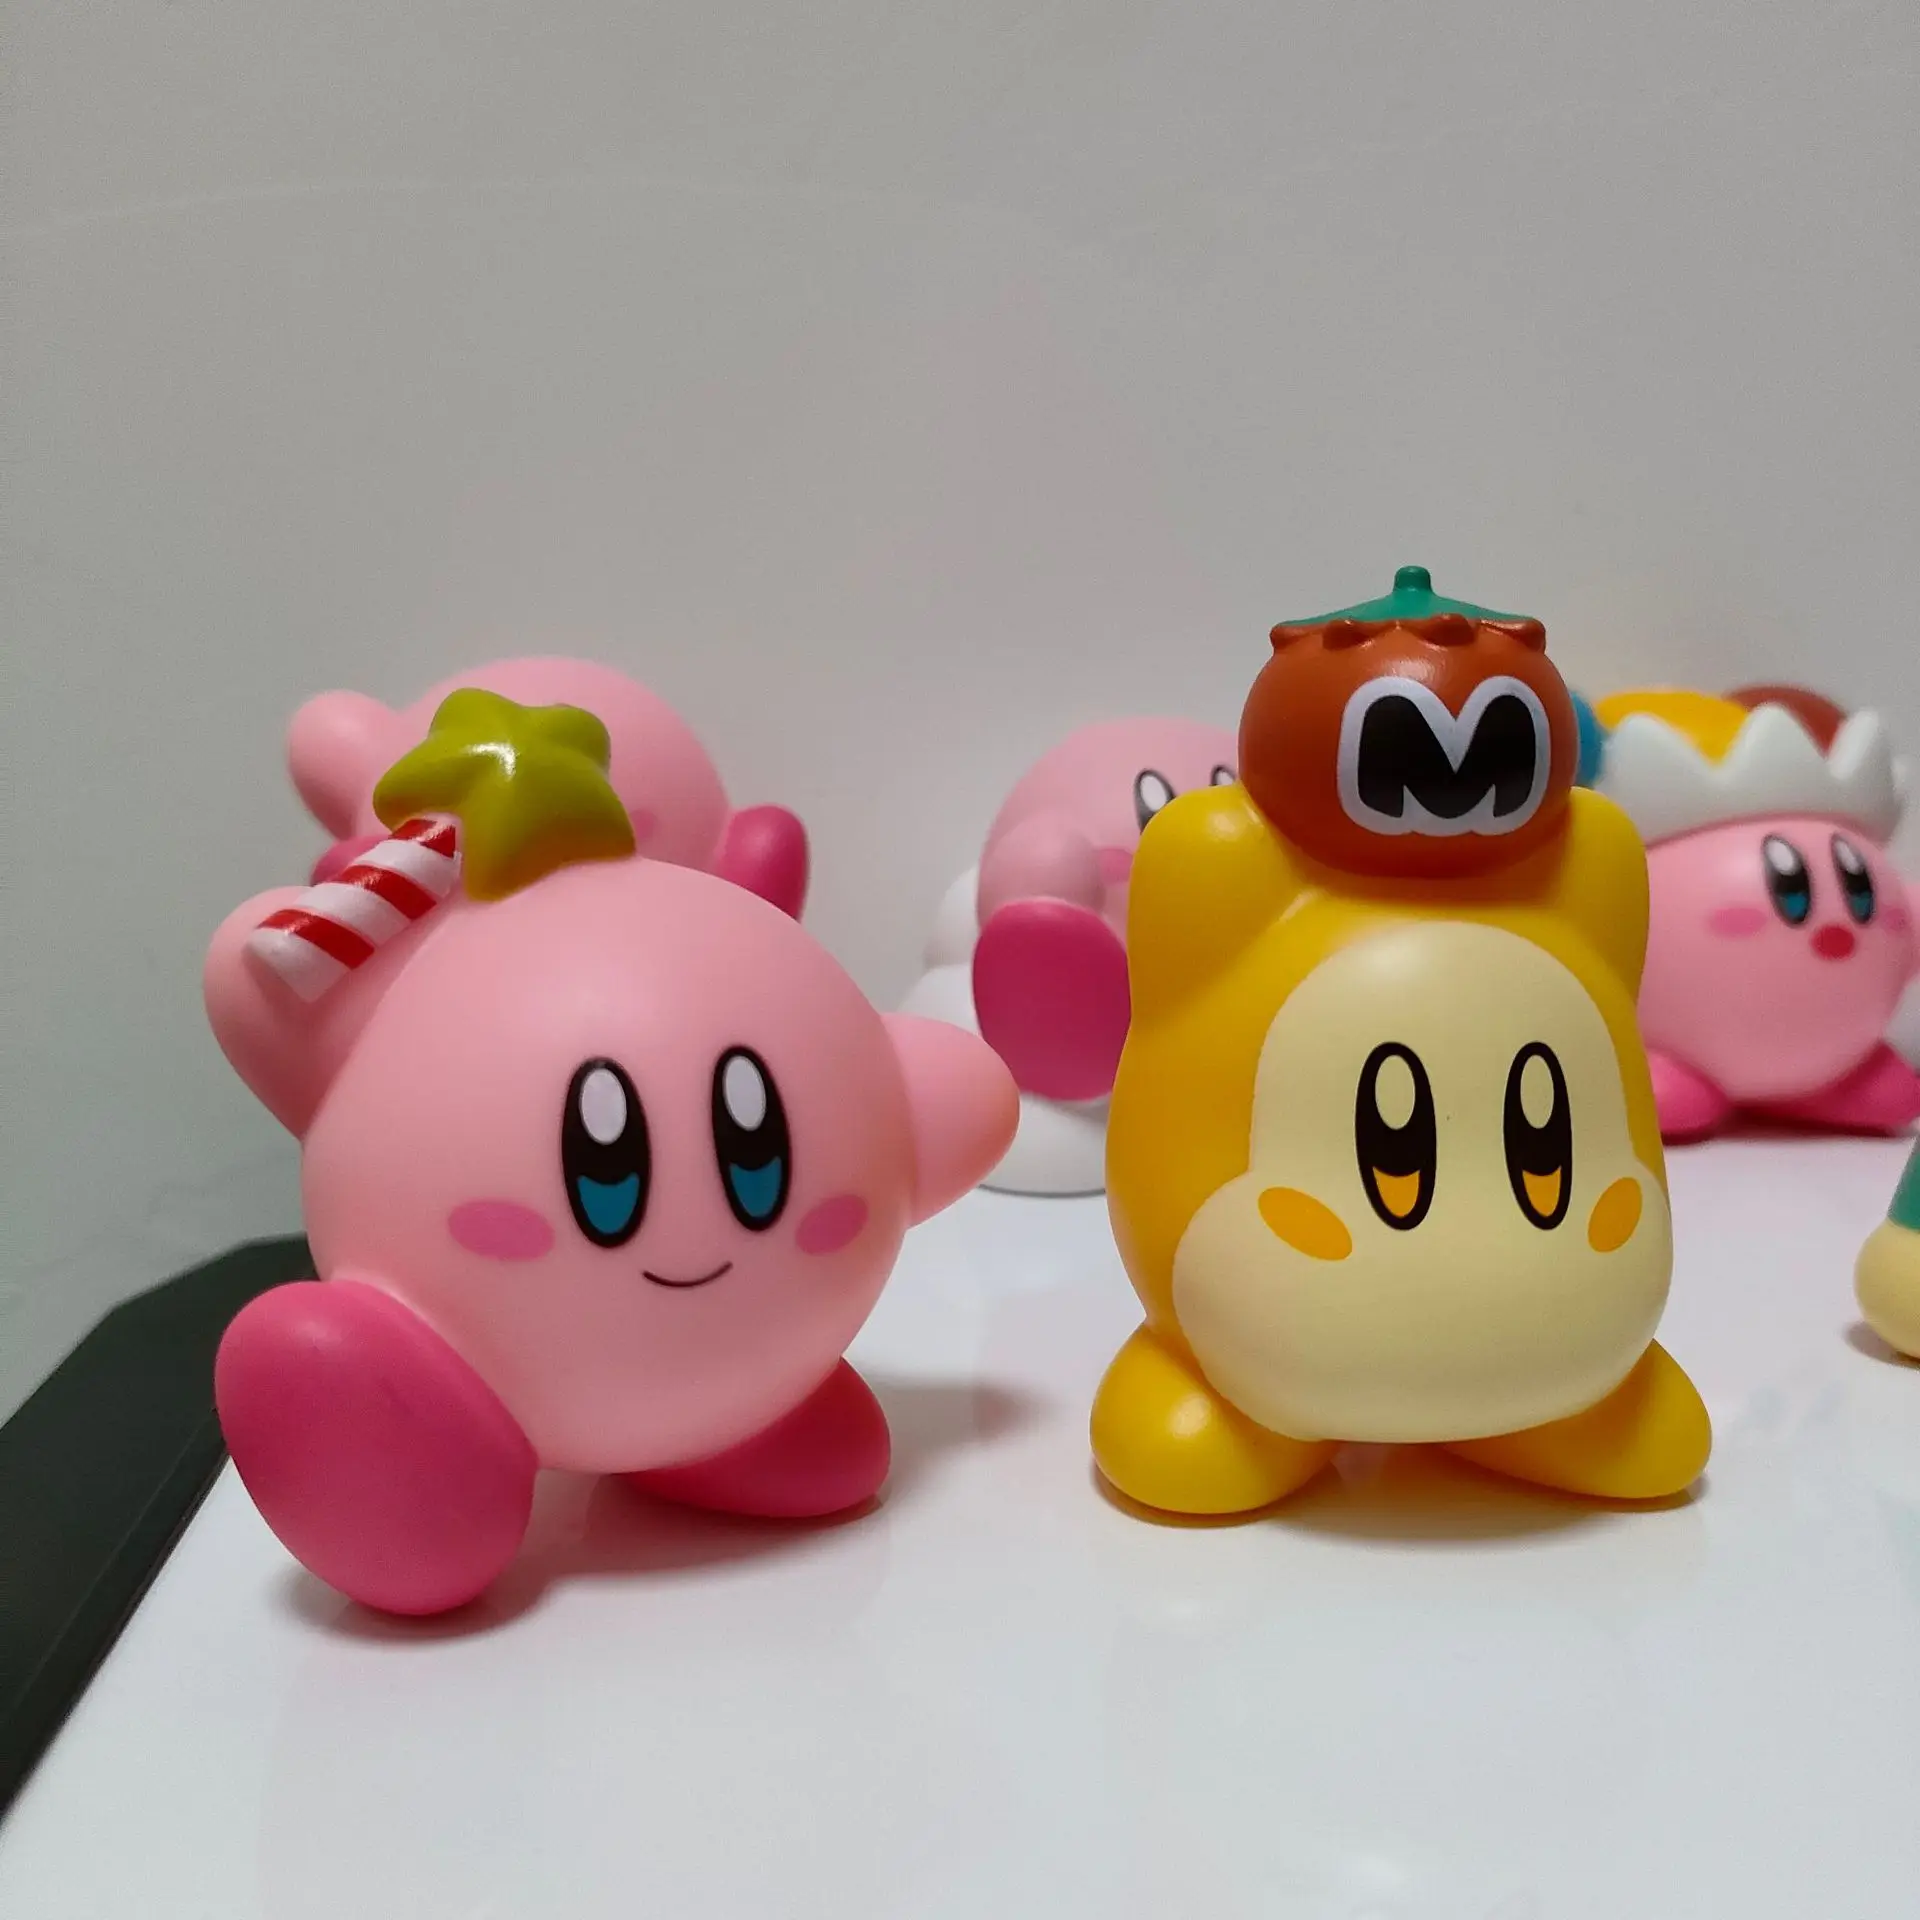 https://ae01.alicdn.com/kf/S8b136ce2a0784ff09e23e5499986ef9dD/Anime-Games-Kirby-Figure-Pink-Kirby-Waddle-Dee-Doo-Cute-Cartoon-Collect-Mini-Toys-Dolls-Action.jpg